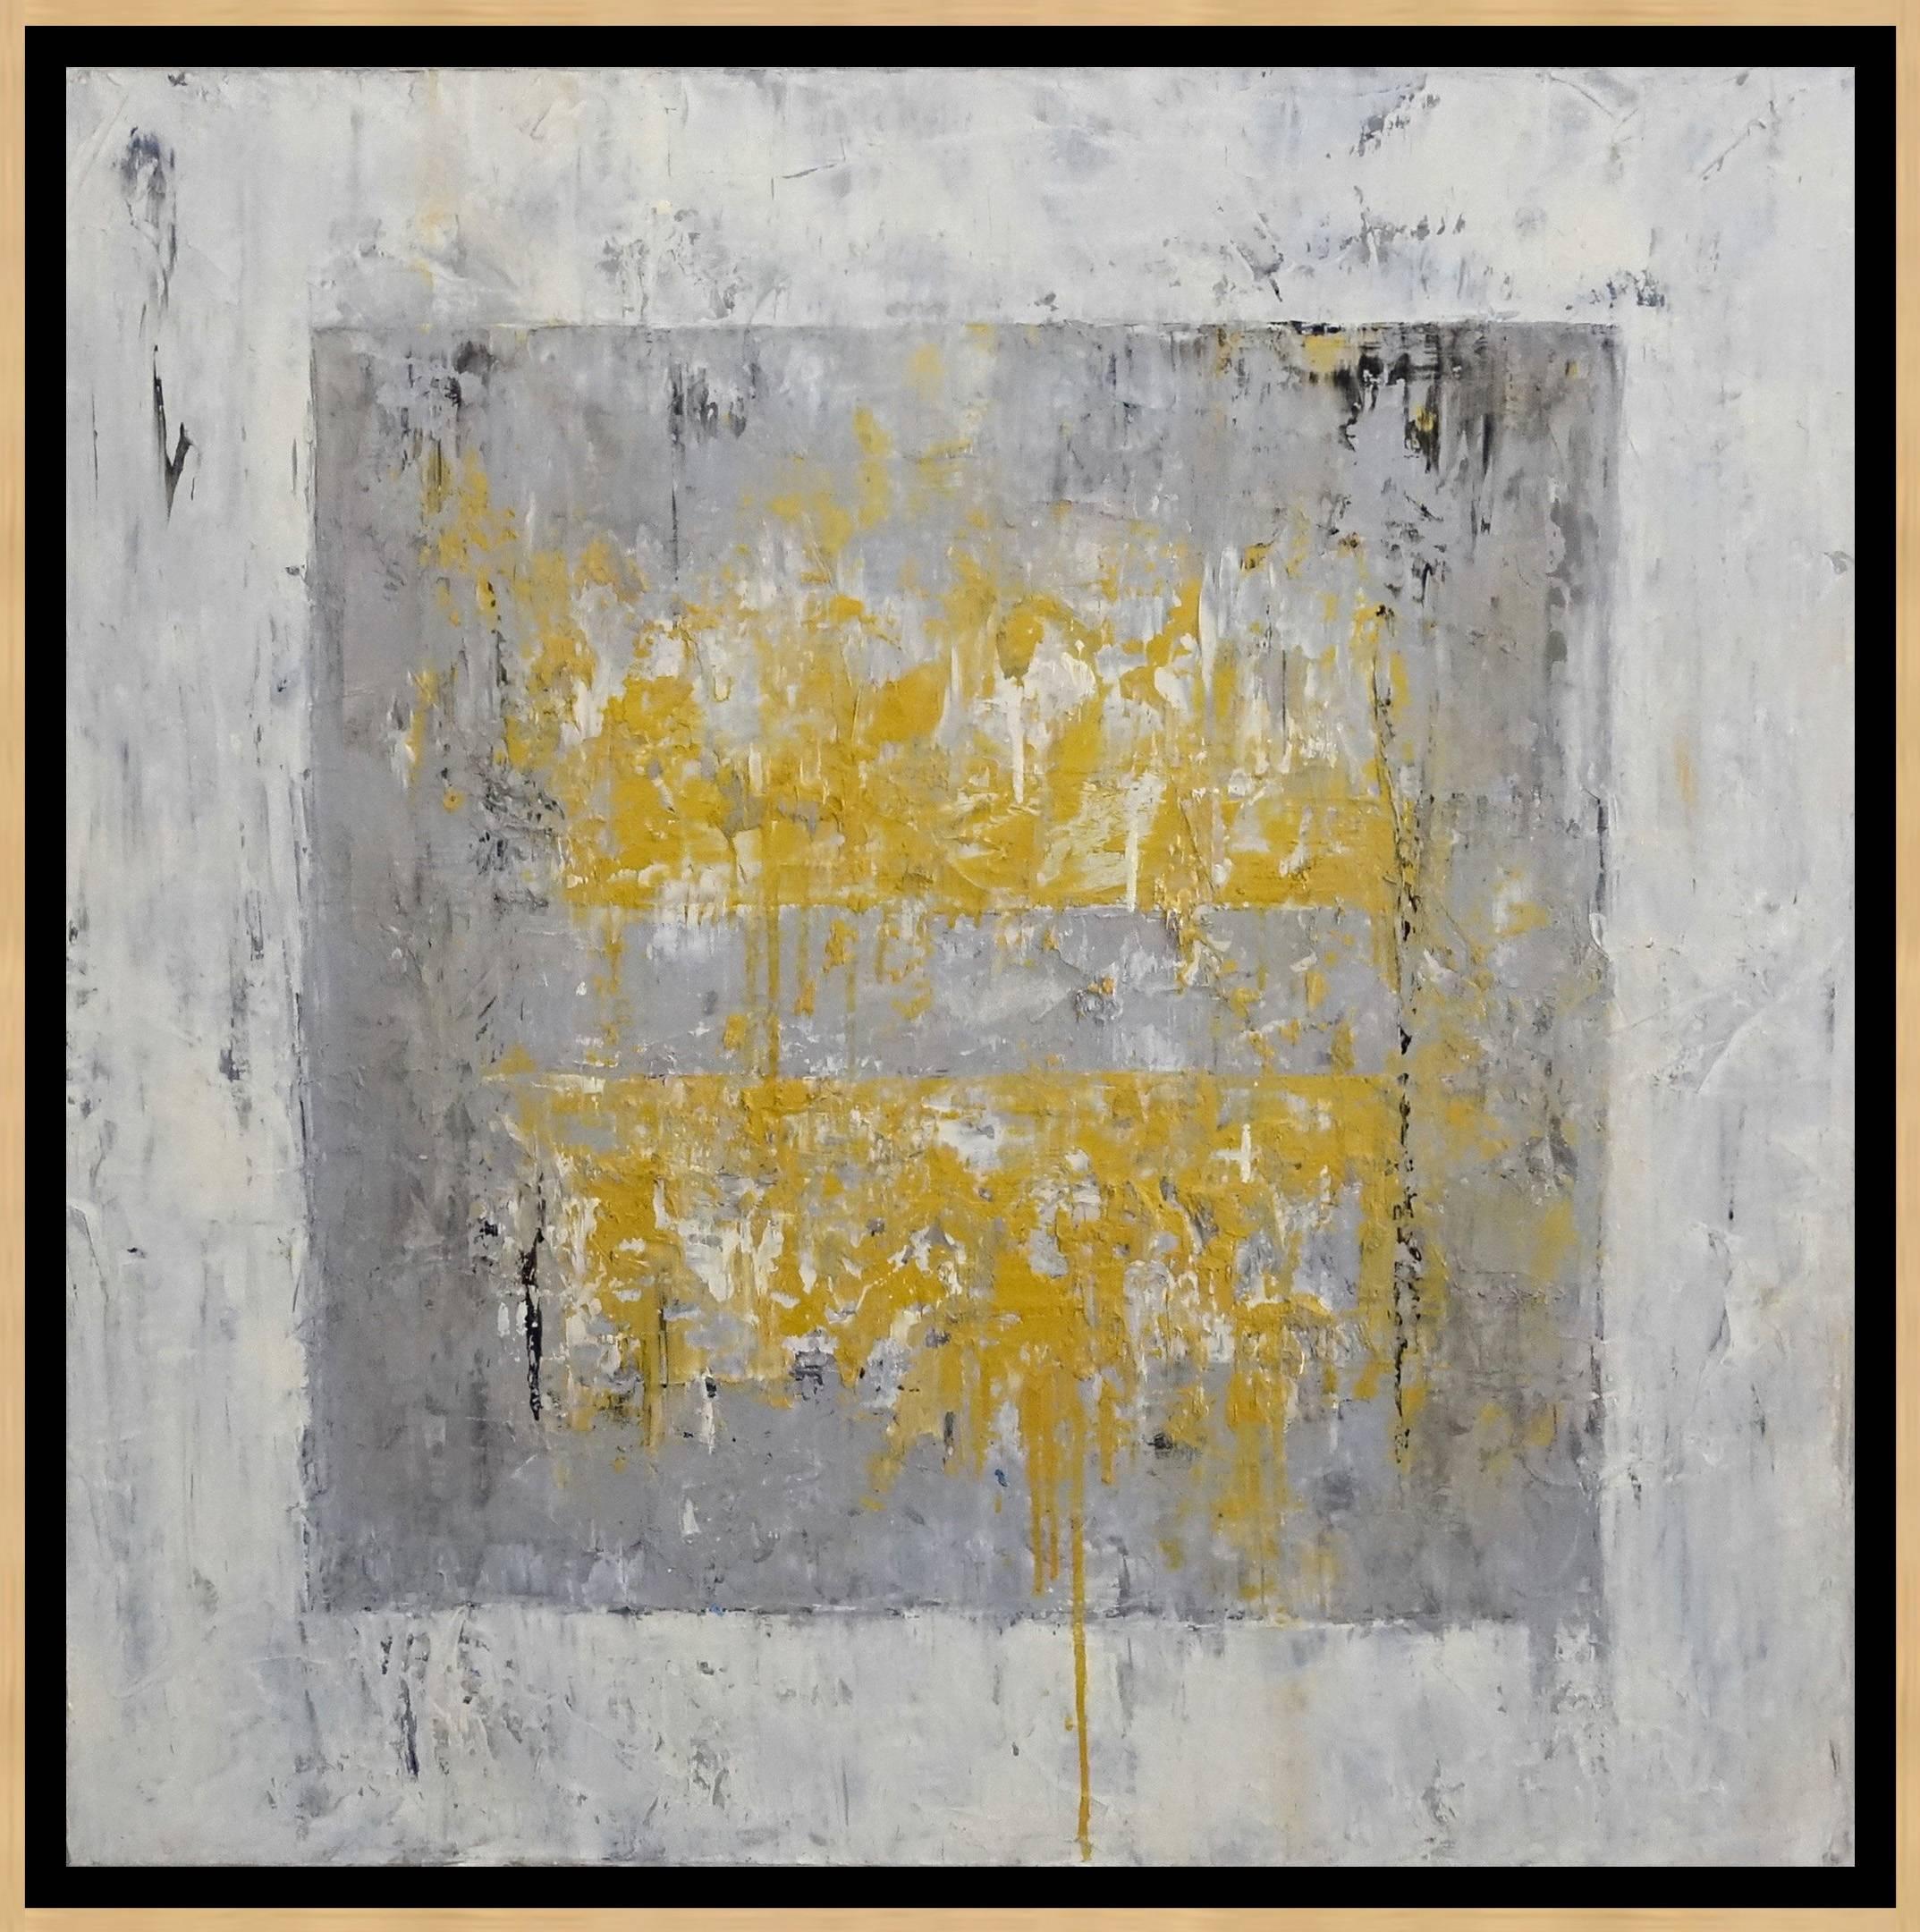 Ice Cube 4 (Gold, Yellow, White, Gray, Silver, Abstract Expressionist Painting) - Art by Jill S. Krutick